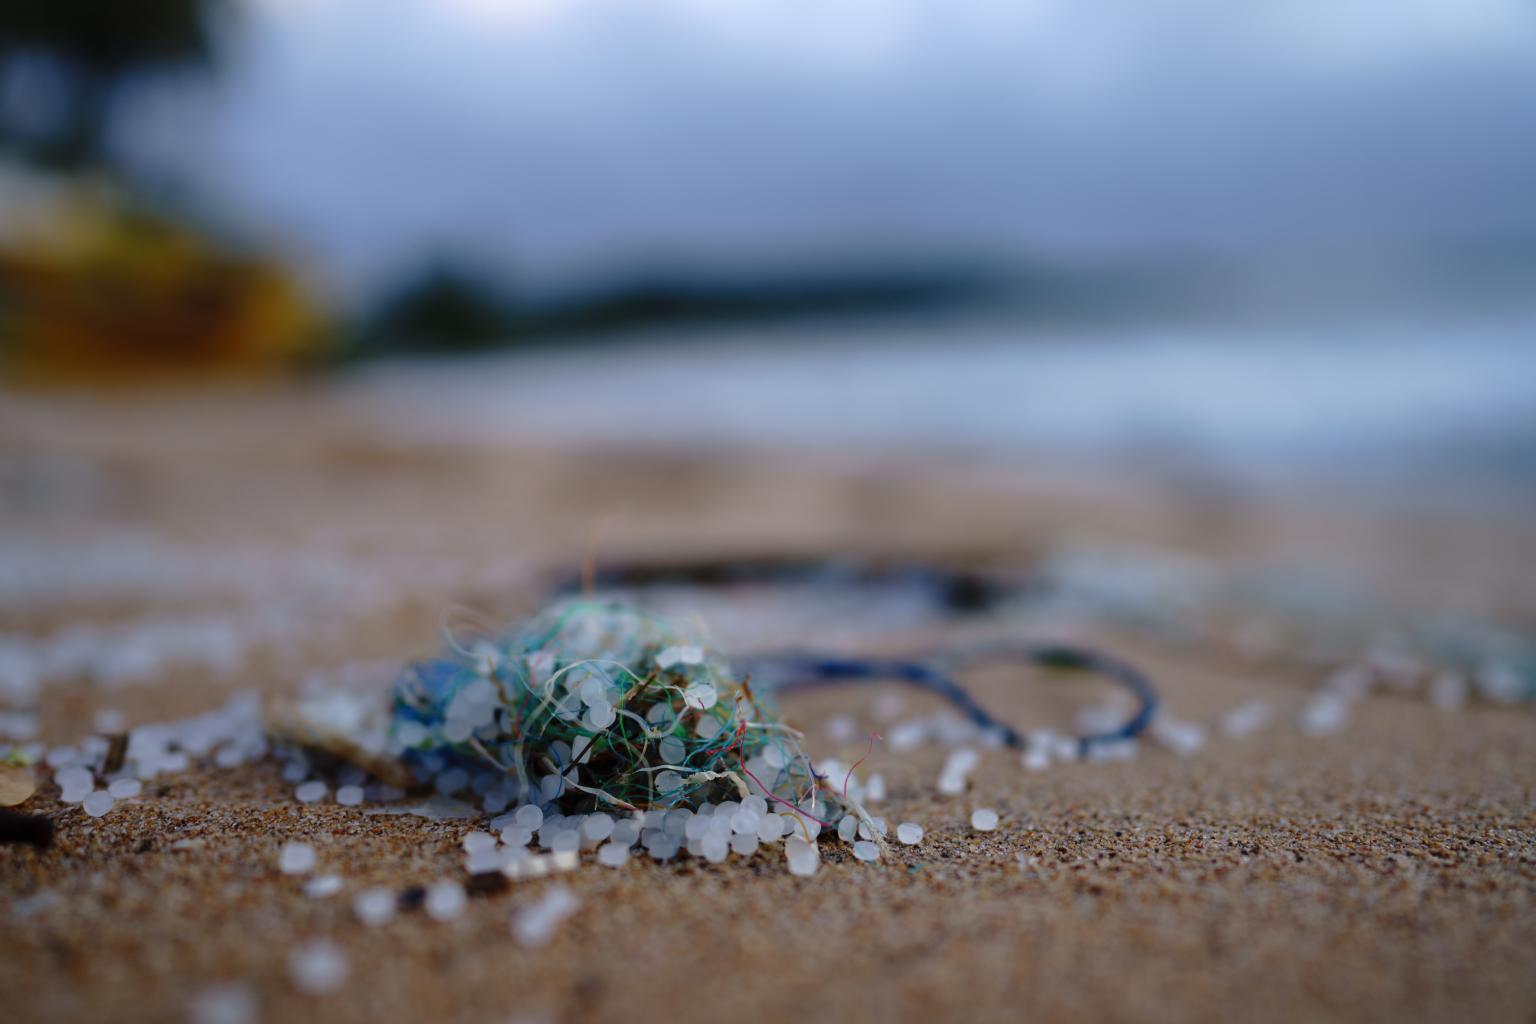 Microplastic particles on a beach